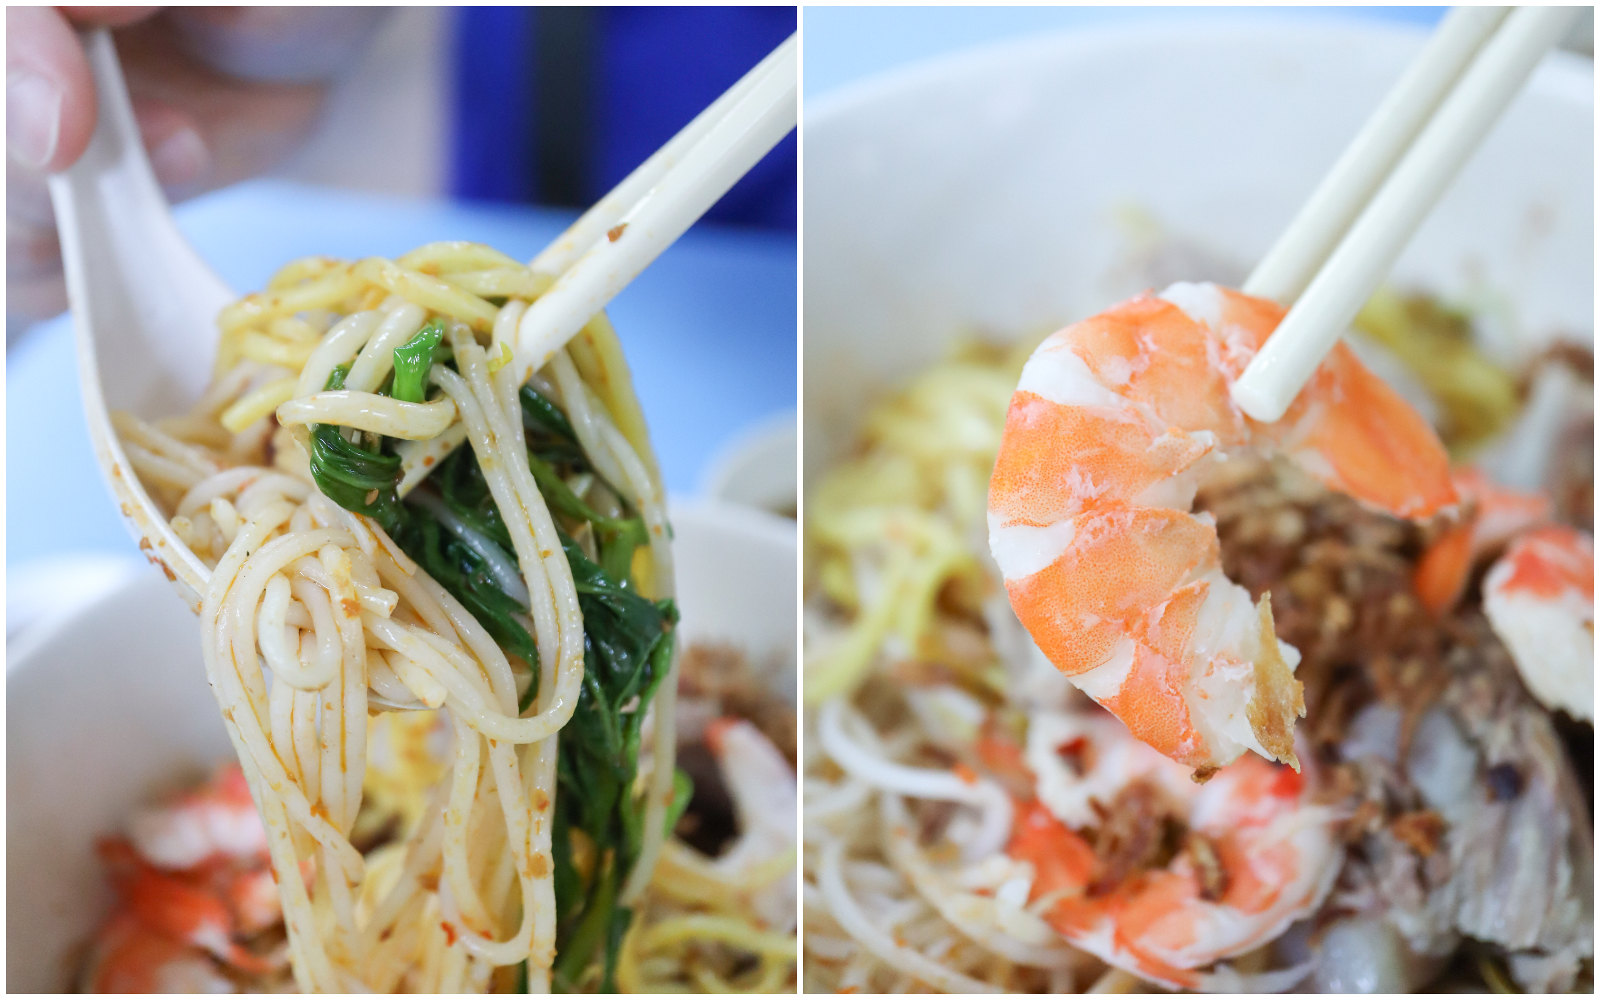 Liang Seah Street Prawn Noodle - dry noodle and prawn lifting